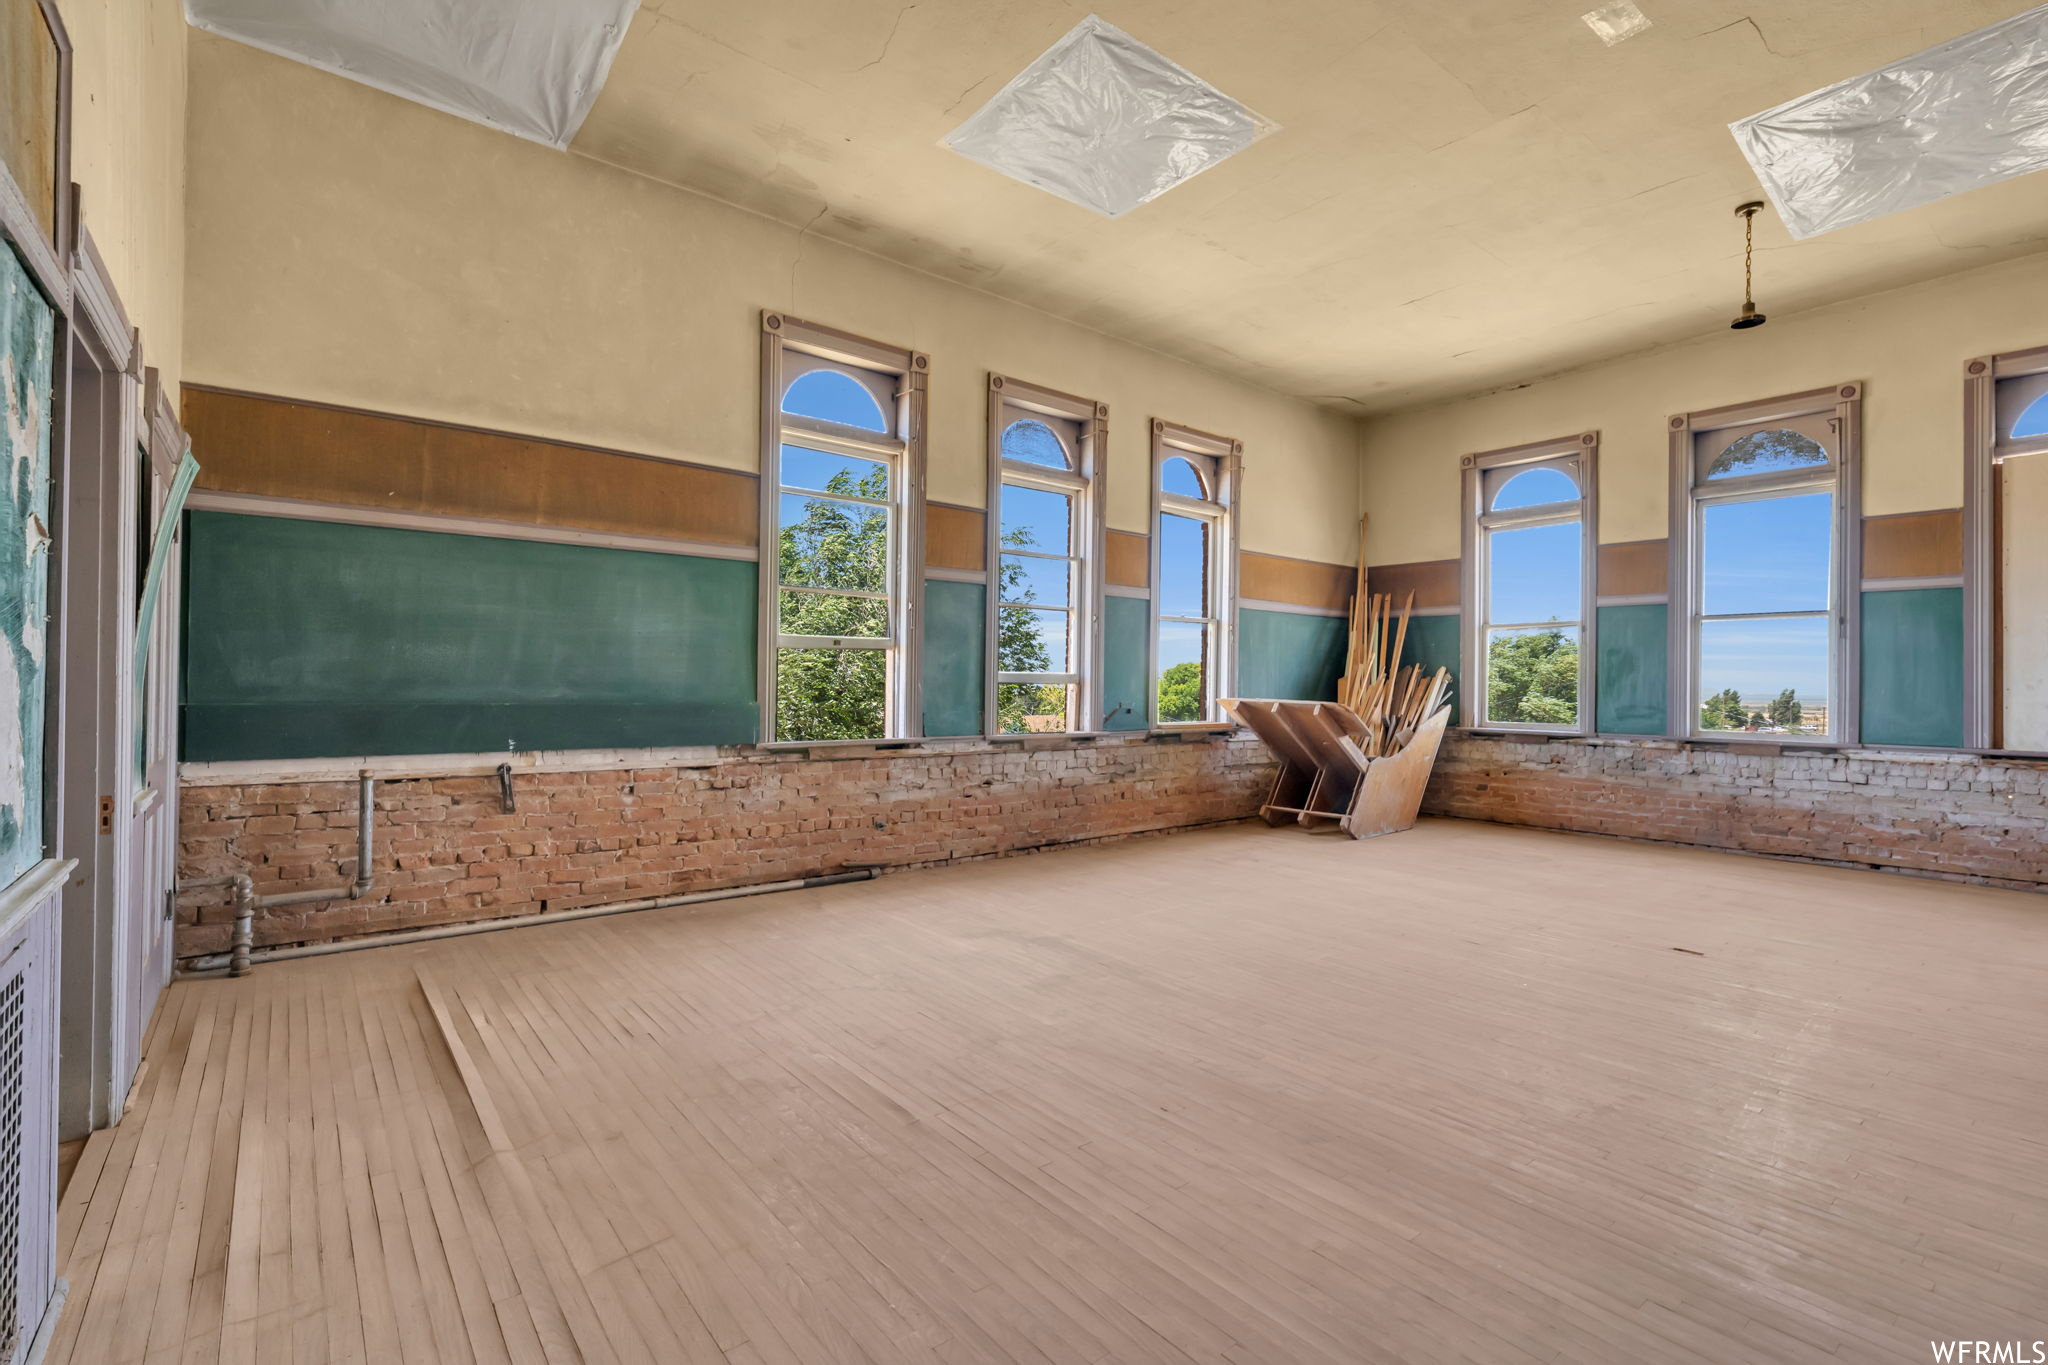 Hardwood floored classroom featuring a healthy amount of sunlight and exposed brick wall